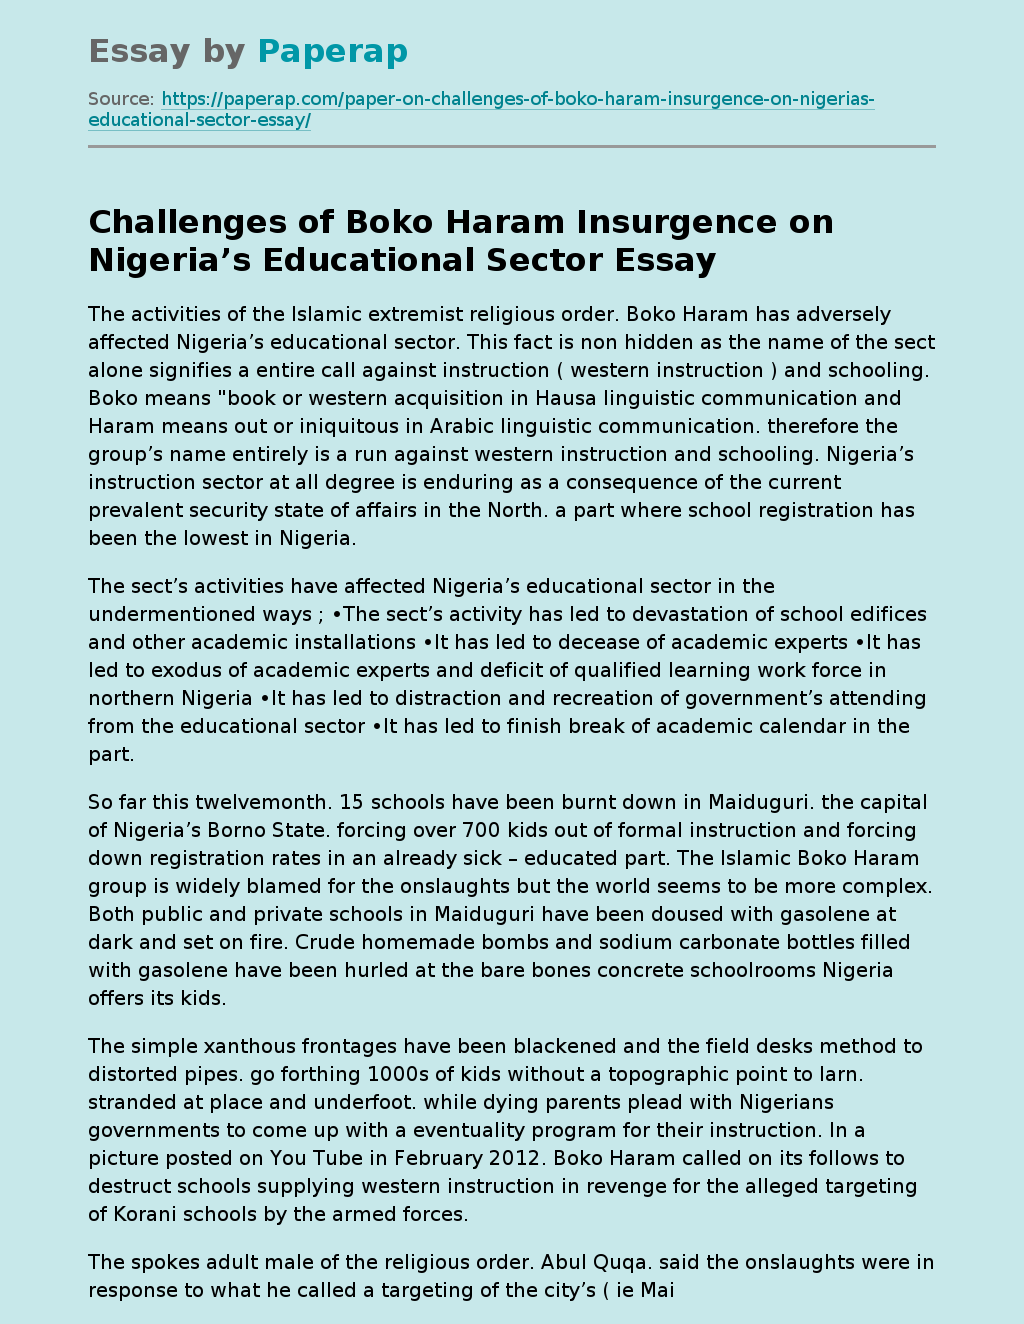 Challenges of Boko Haram Insurgence on Nigeria’s Educational Sector